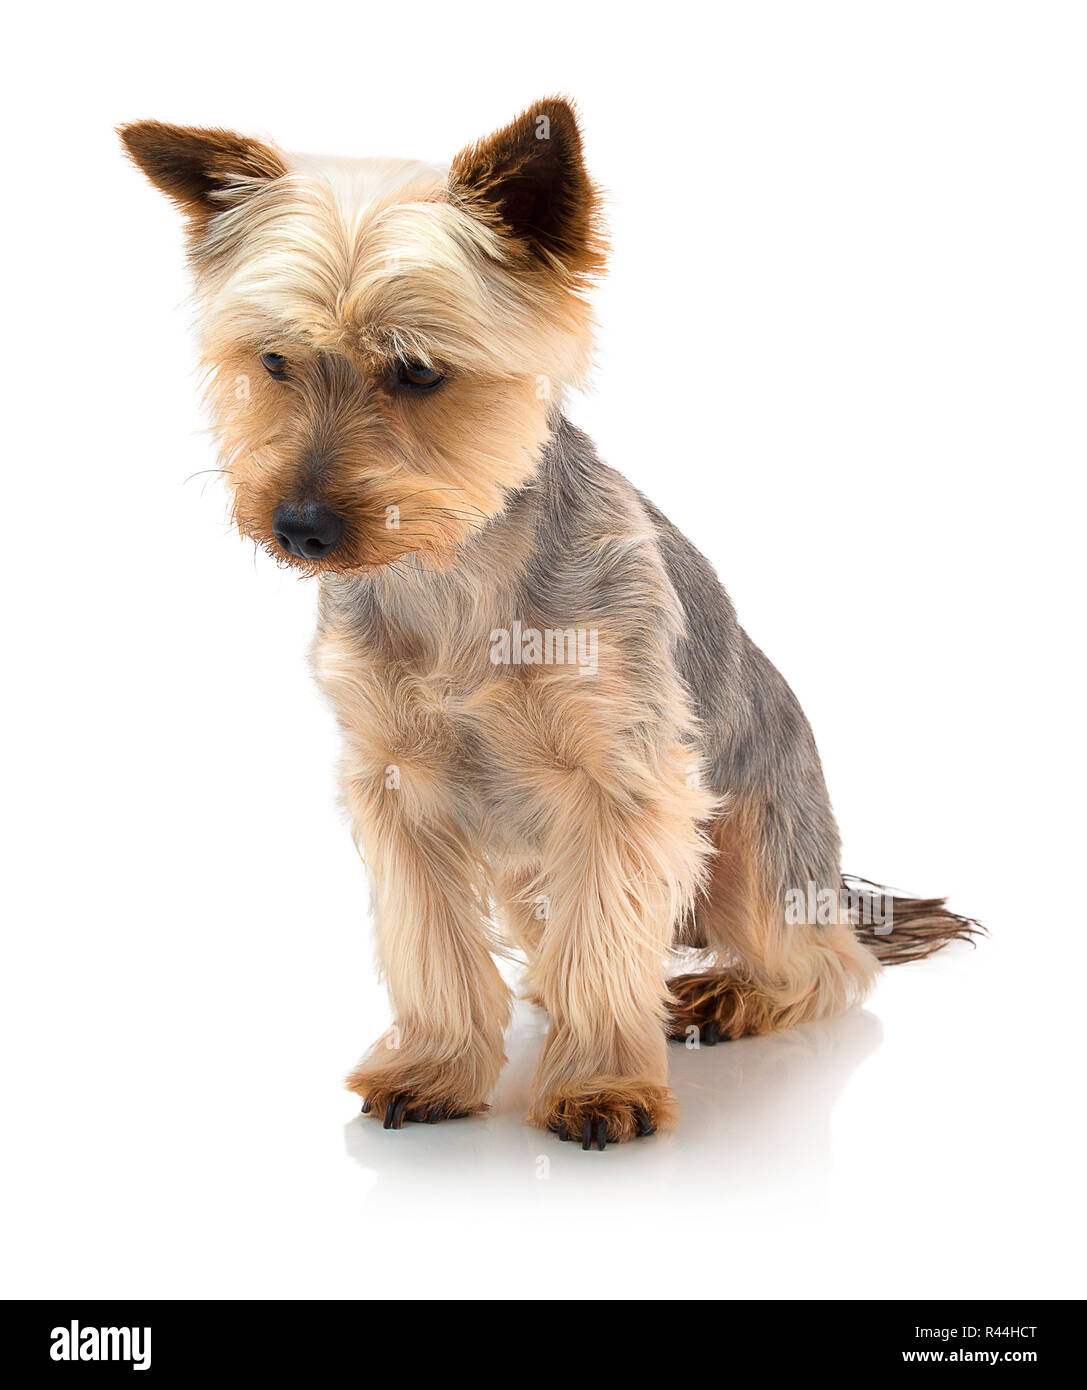 An adorable Australian silky terrier sitting against a white background  with shadow reflection. Dog sitting on white underlay Stock Photo - Alamy